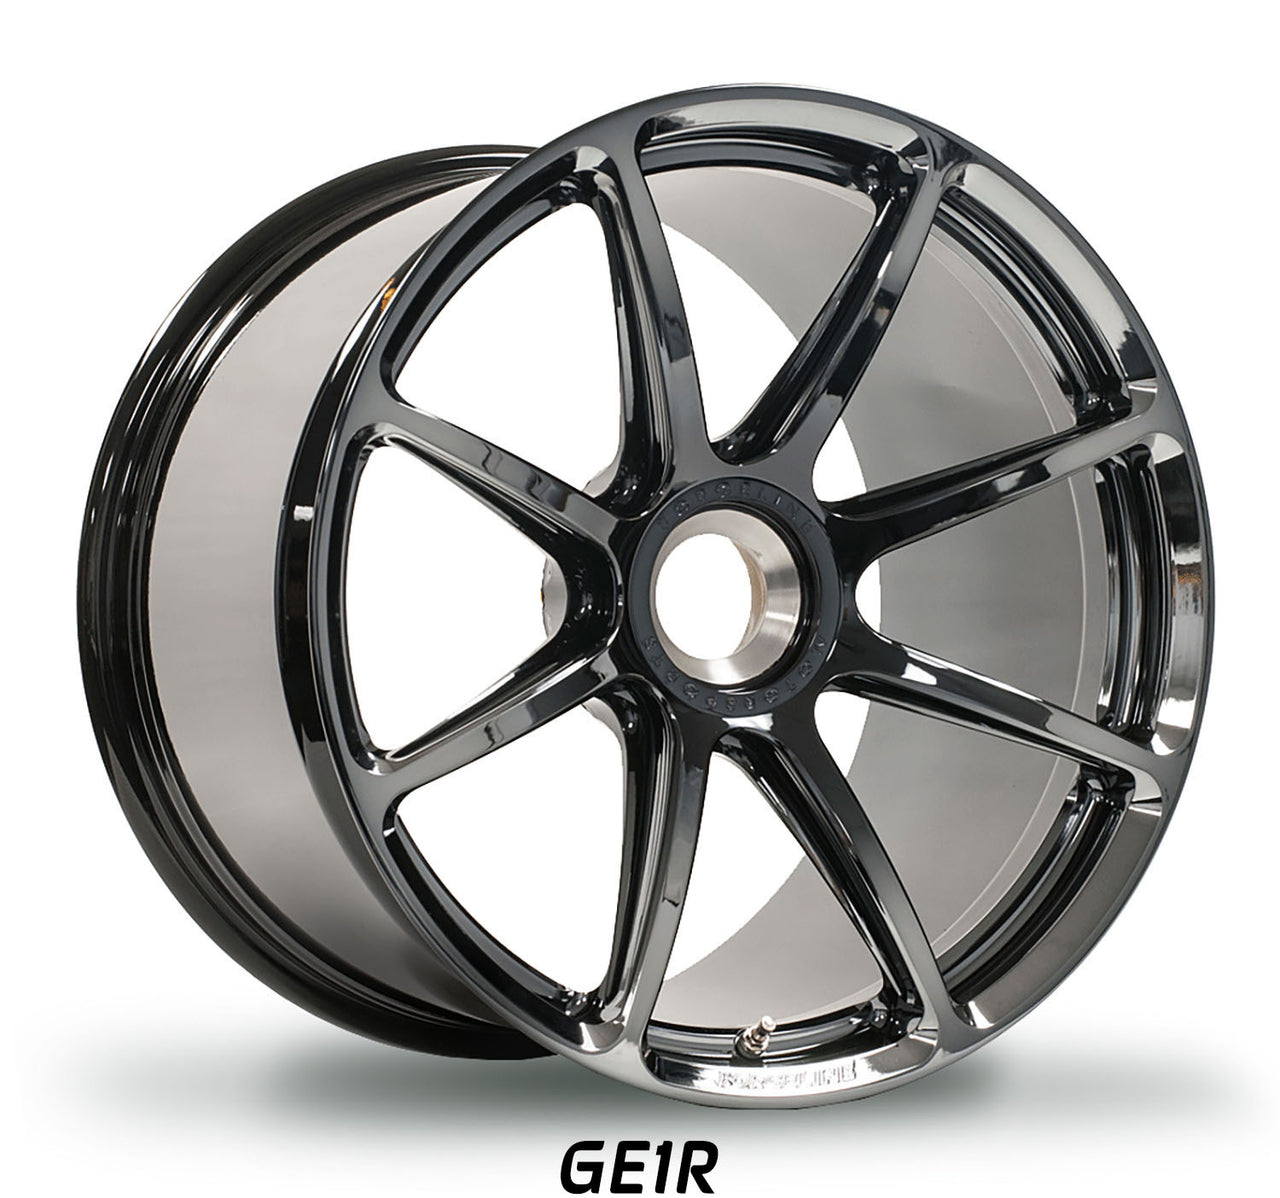 Forgeline GE1R forged racing wheel for center lock Porsche 992 GT3 the best racing wheels for HPDE track days